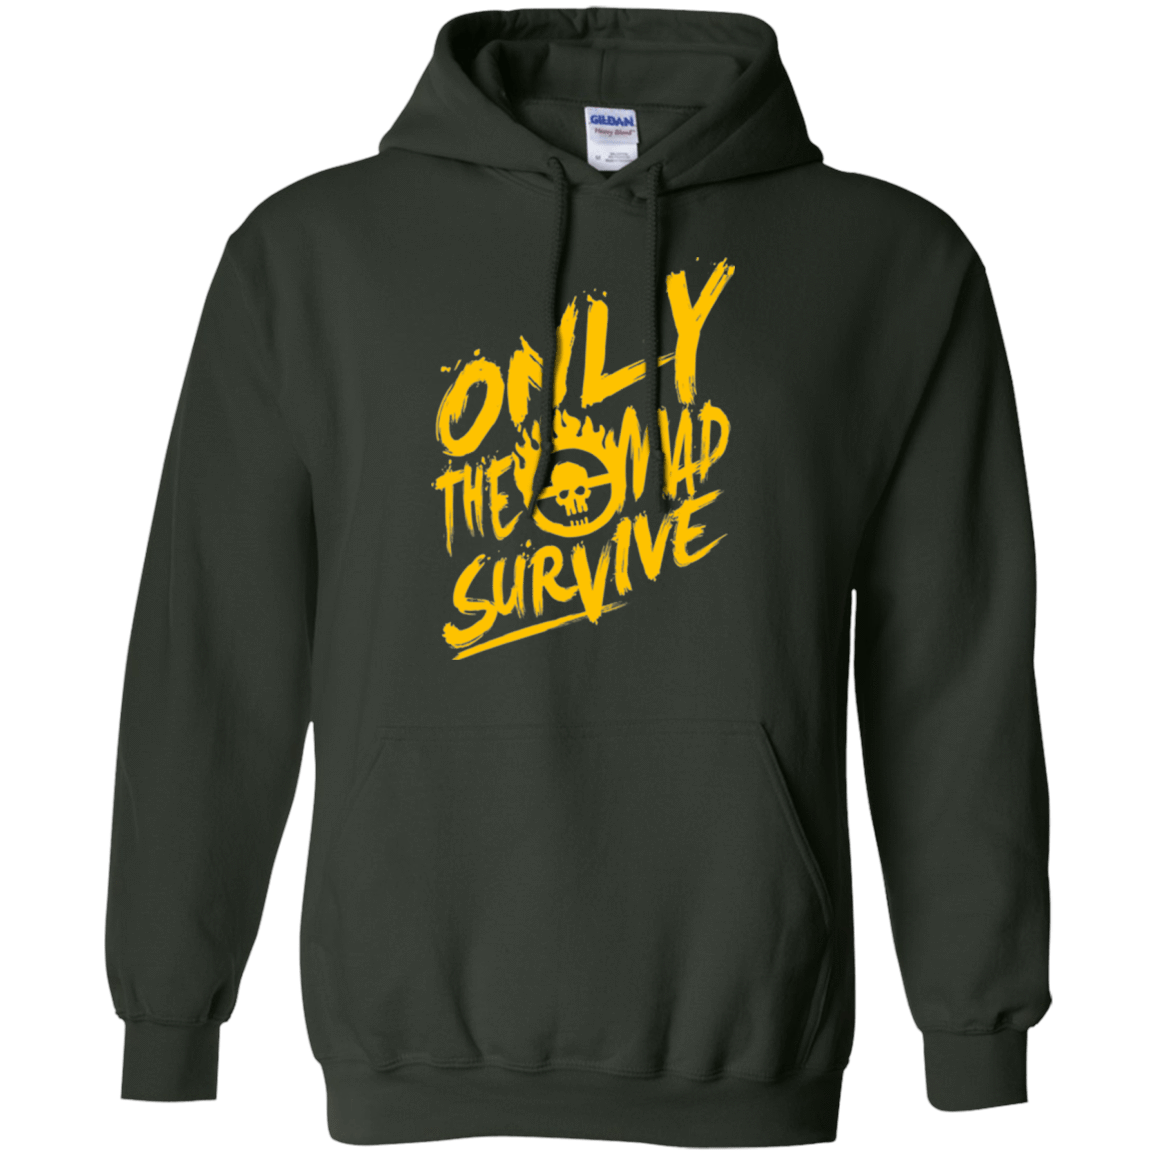 Sweatshirts Forest Green / Small Only The Mad Yellow Pullover Hoodie